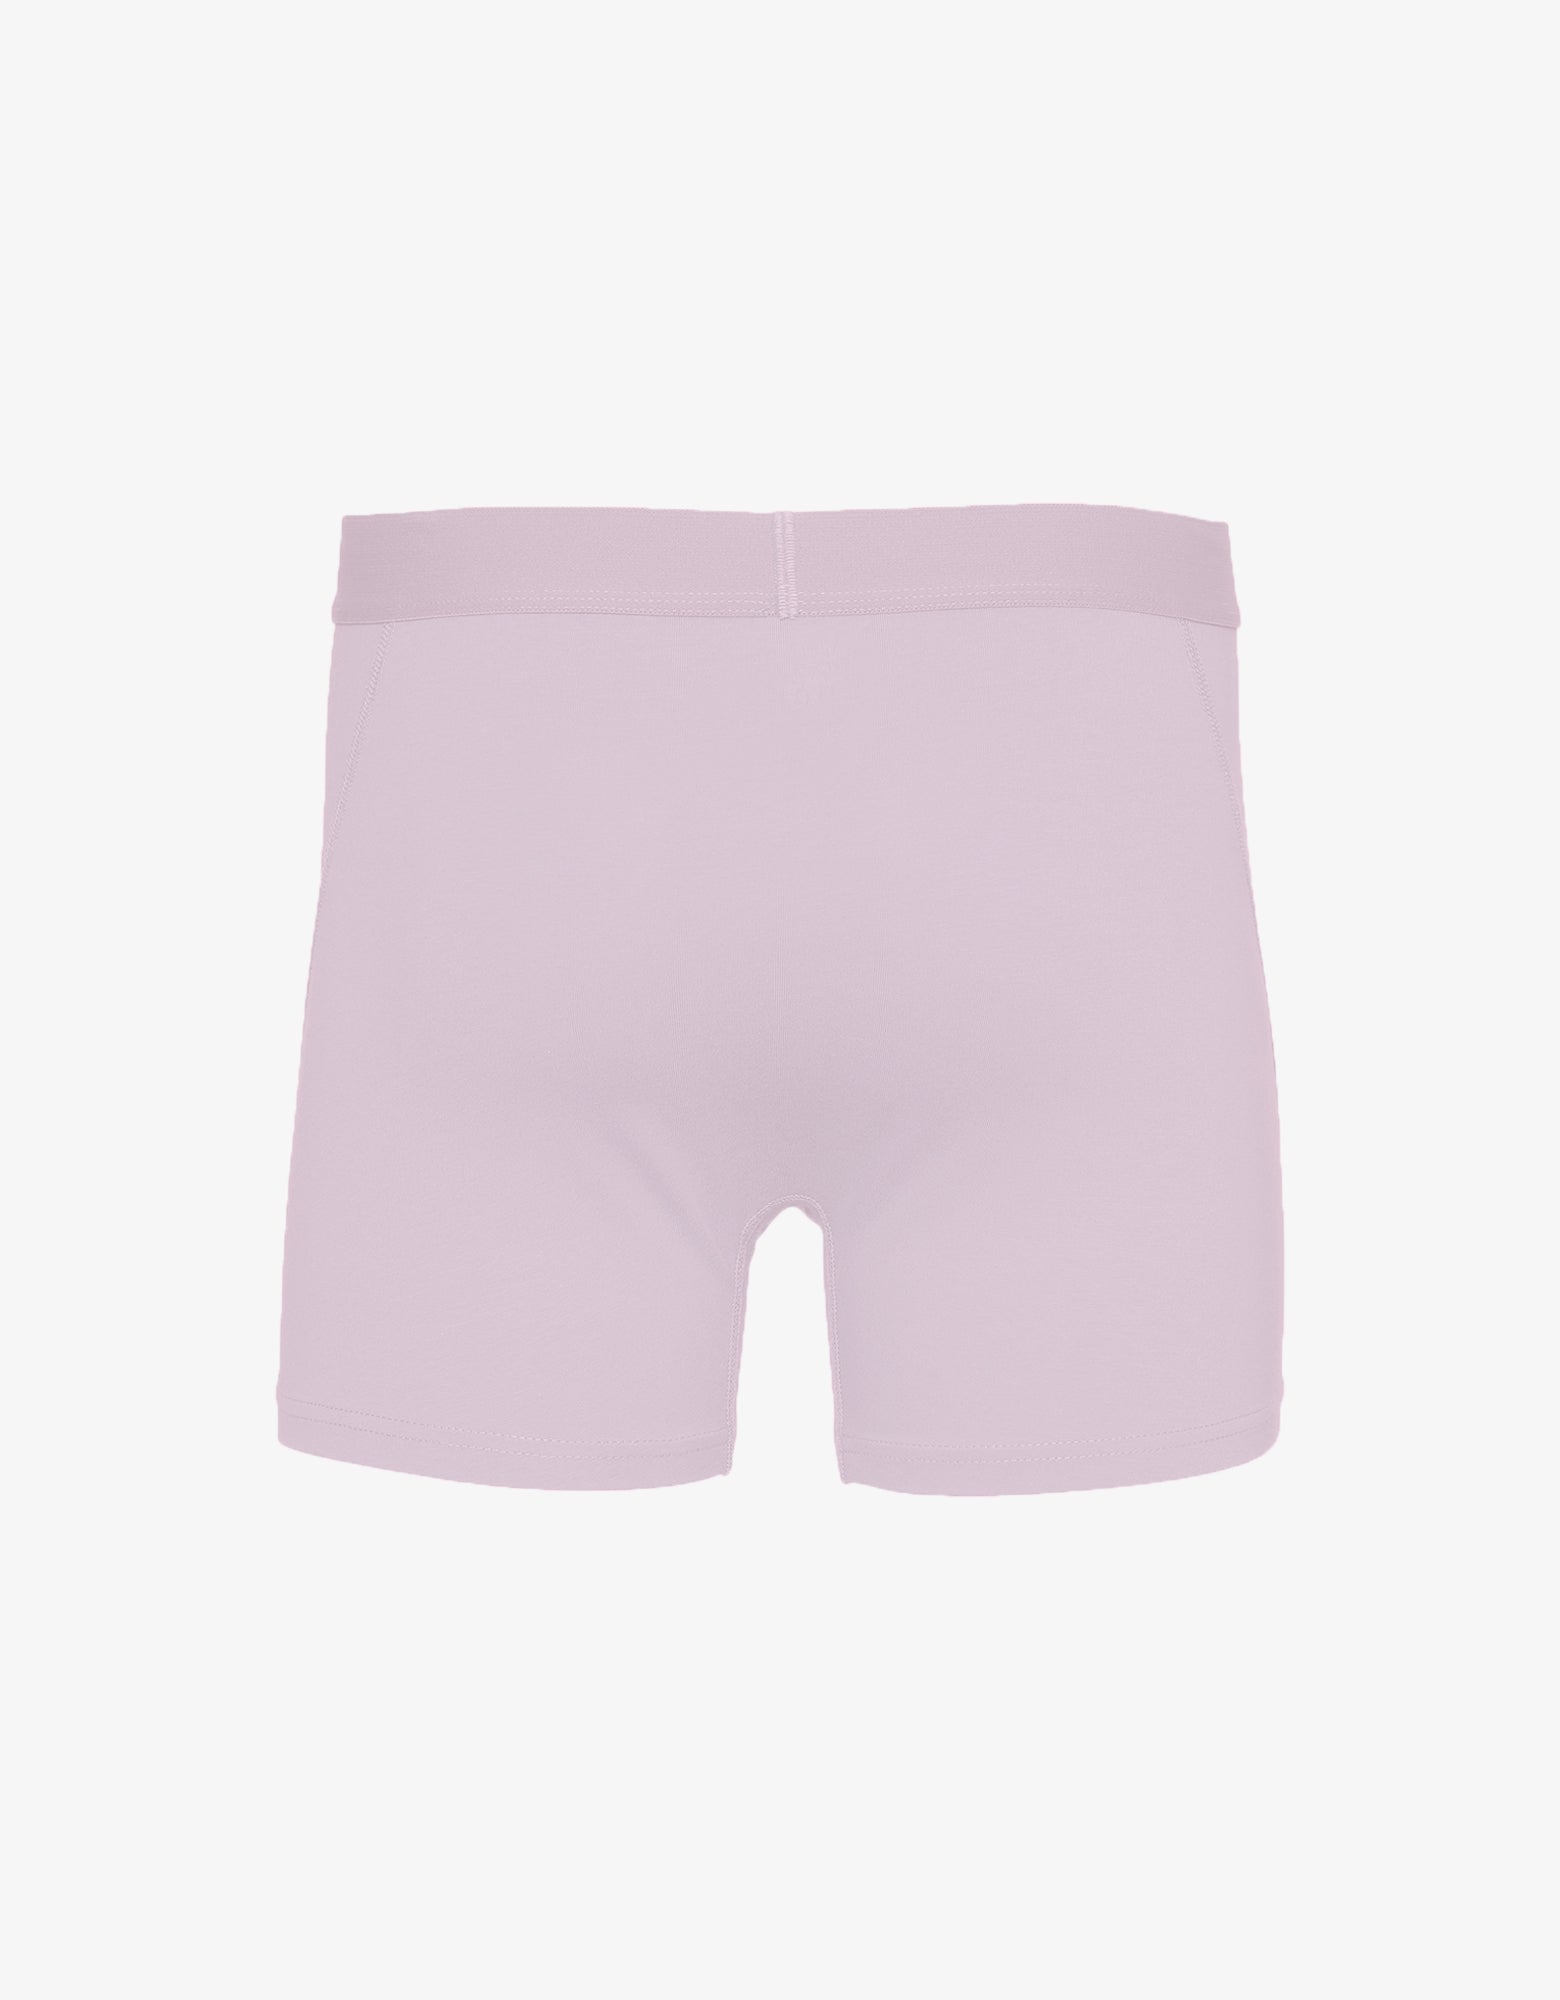 Colorful Standard Classic Organic Boxer Briefs Underwear Faded Pink